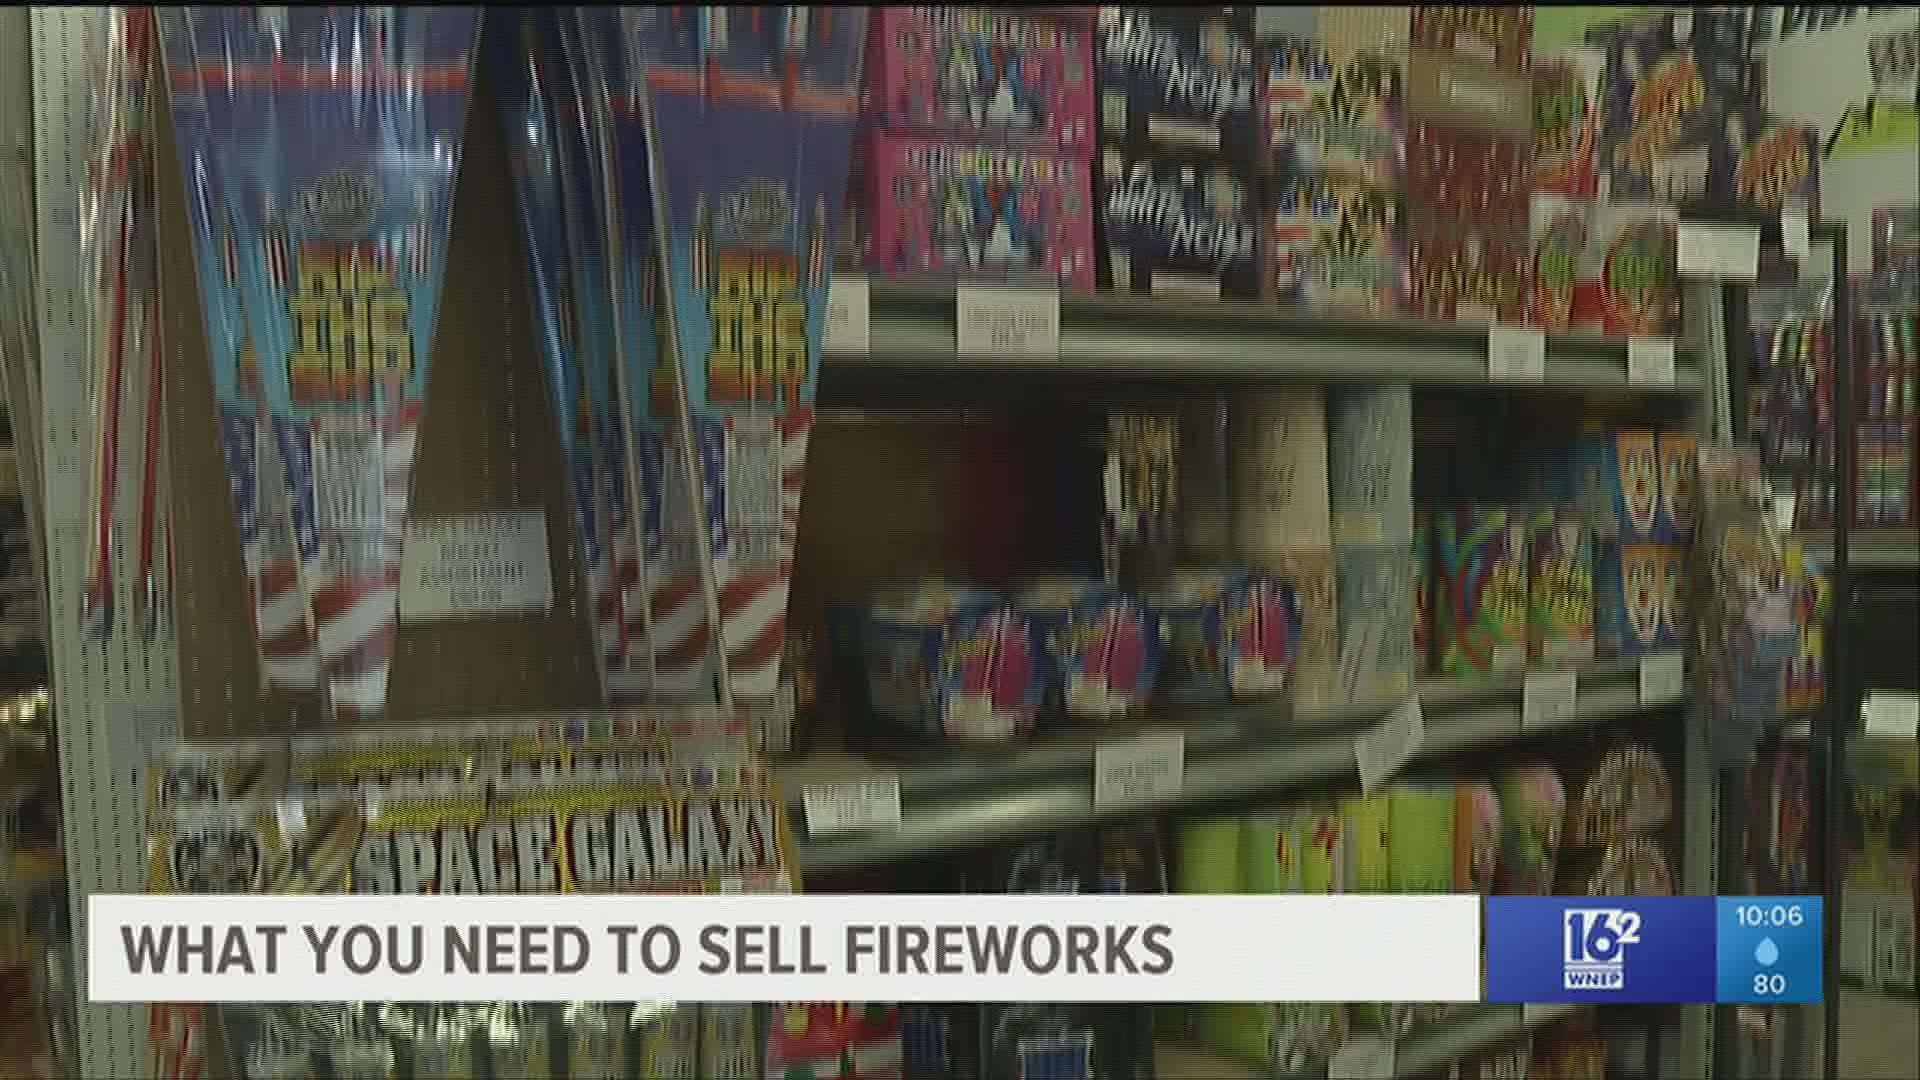 Questions remain after several hundred pounds of fireworks were seized from a building in Olyphant. A fireworks store owner in Monroe County says context matters.